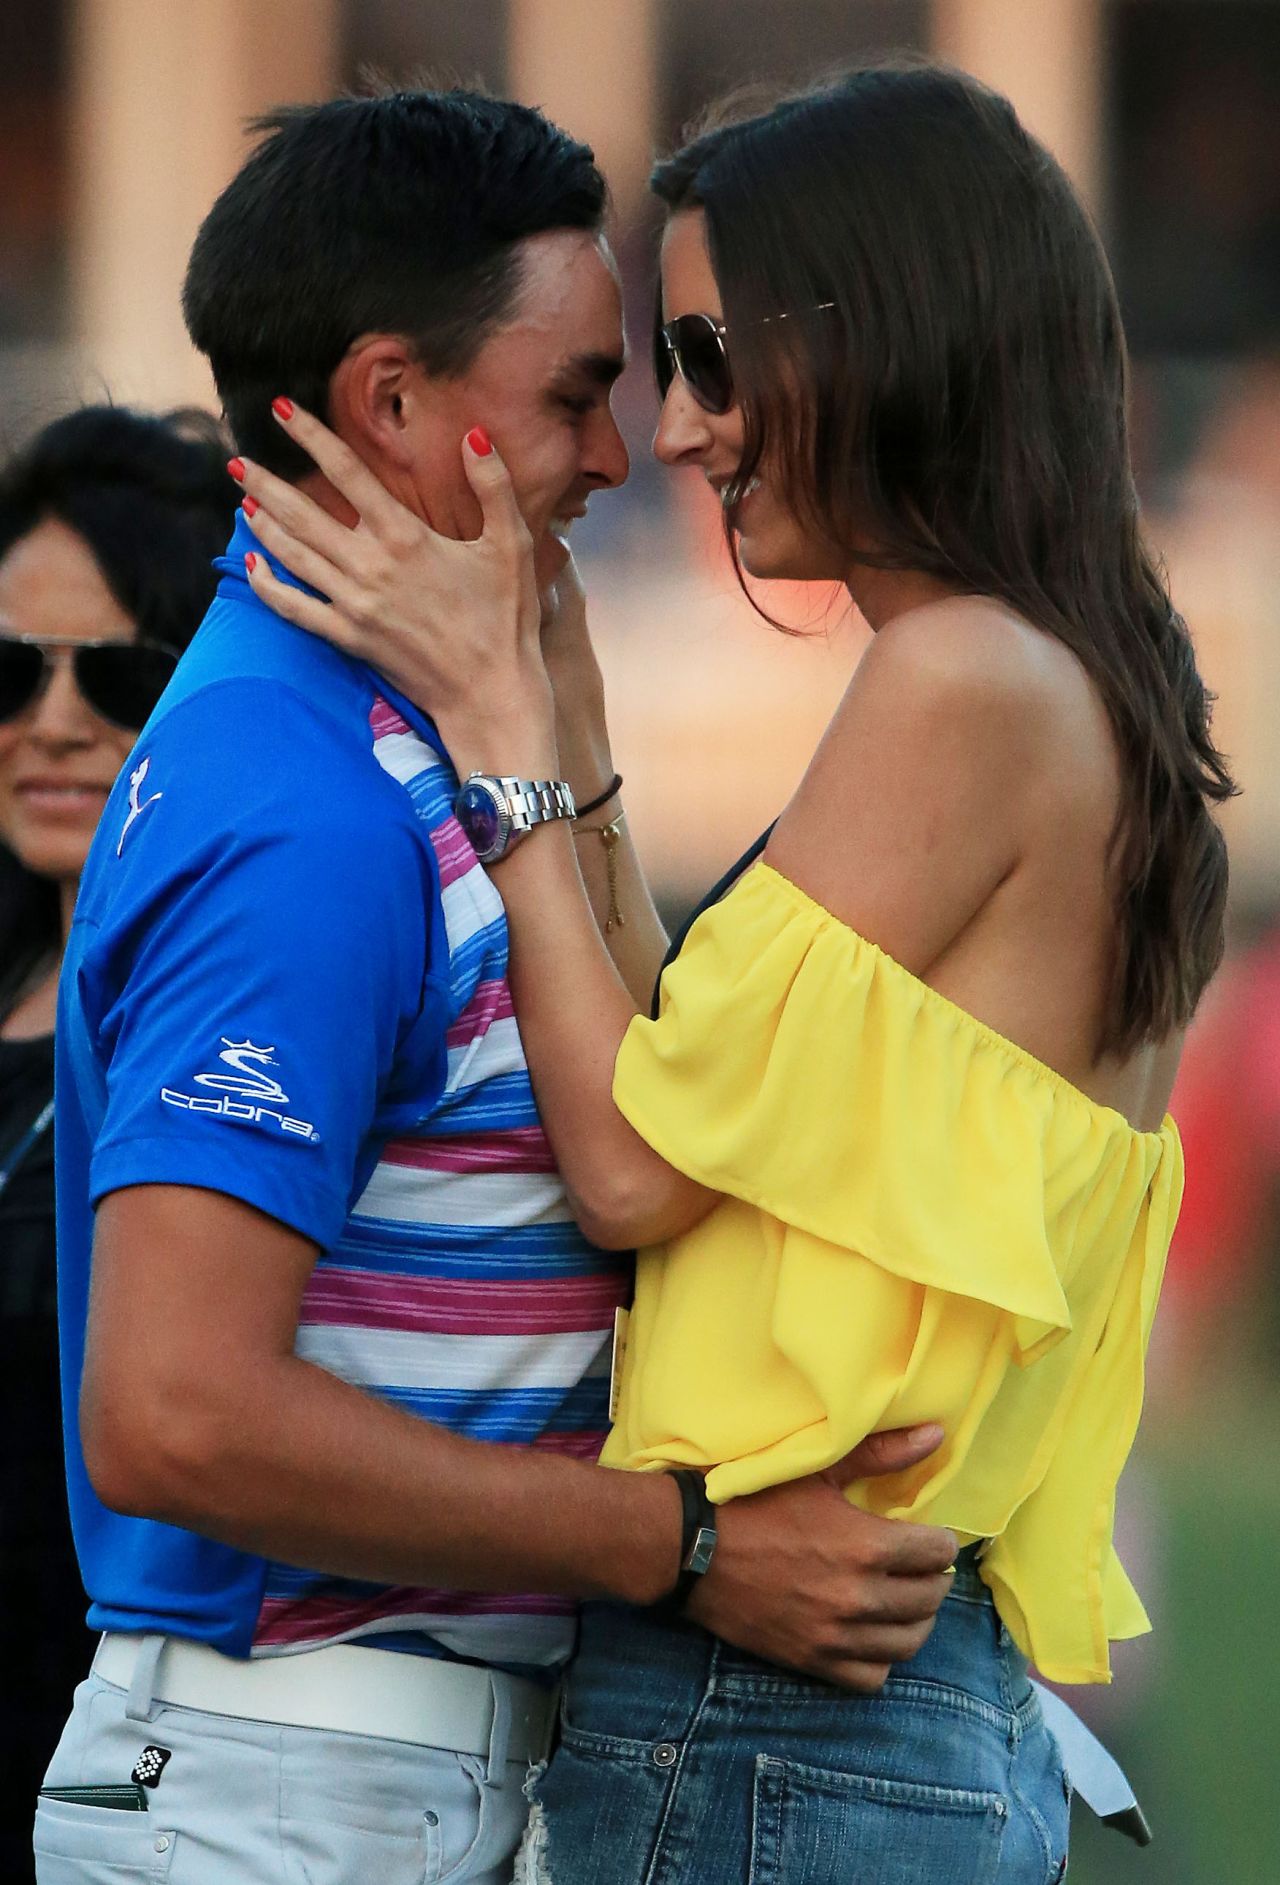 Golf's new power couple? Fowler only has eyes for Randock after winning at TPC Sawgrass.